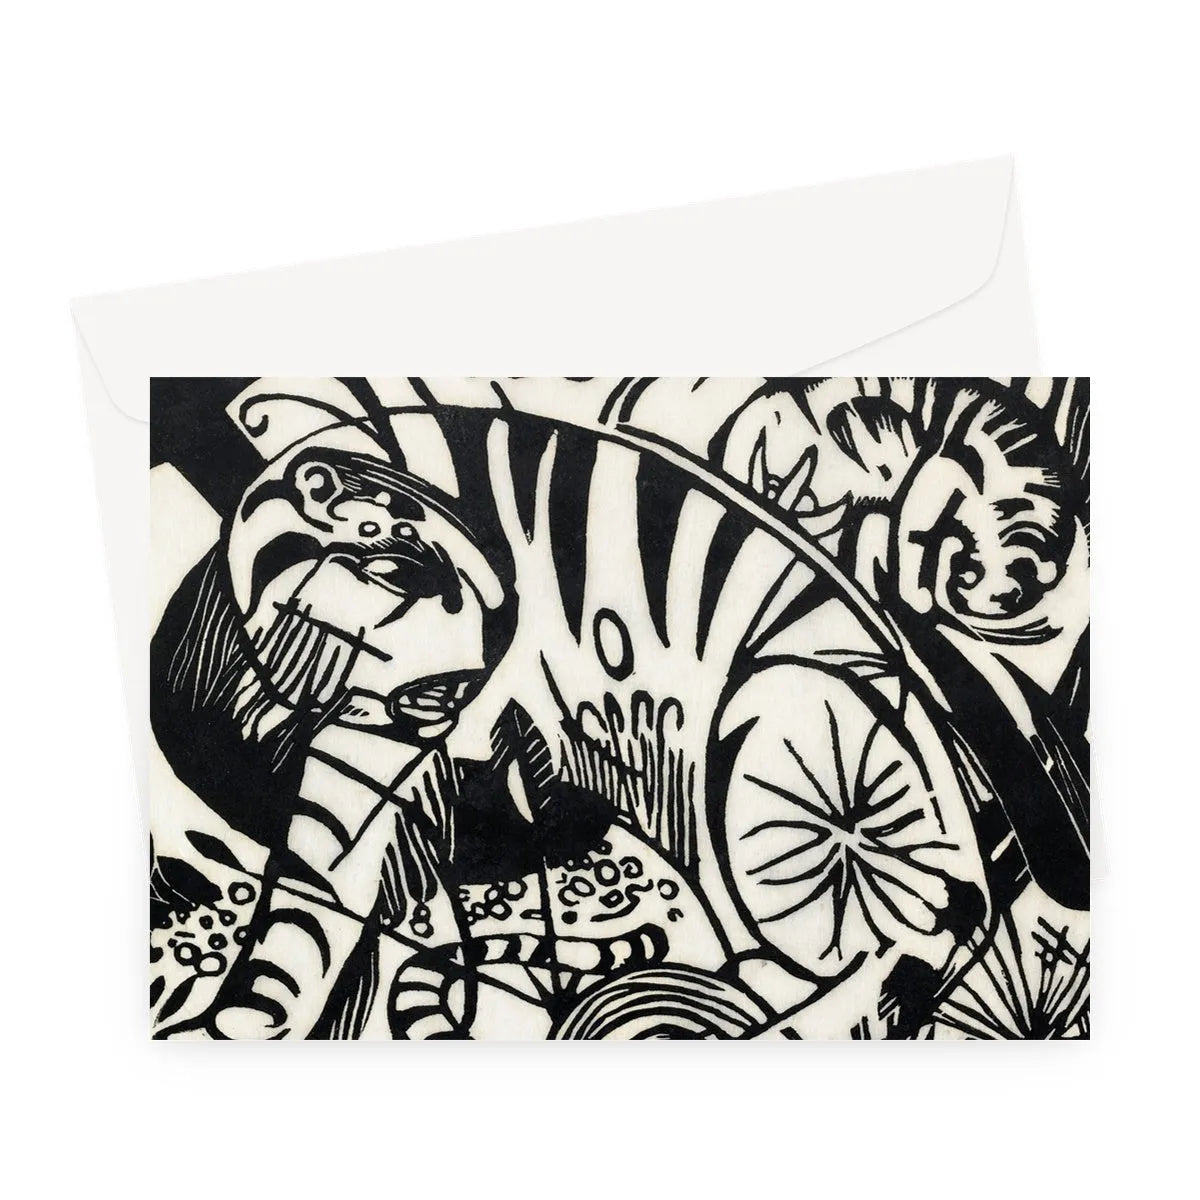 Tiger By Franz Marc Greeting Card - A5 Landscape / 1 Card - Notebooks & Notepads - Aesthetic Art